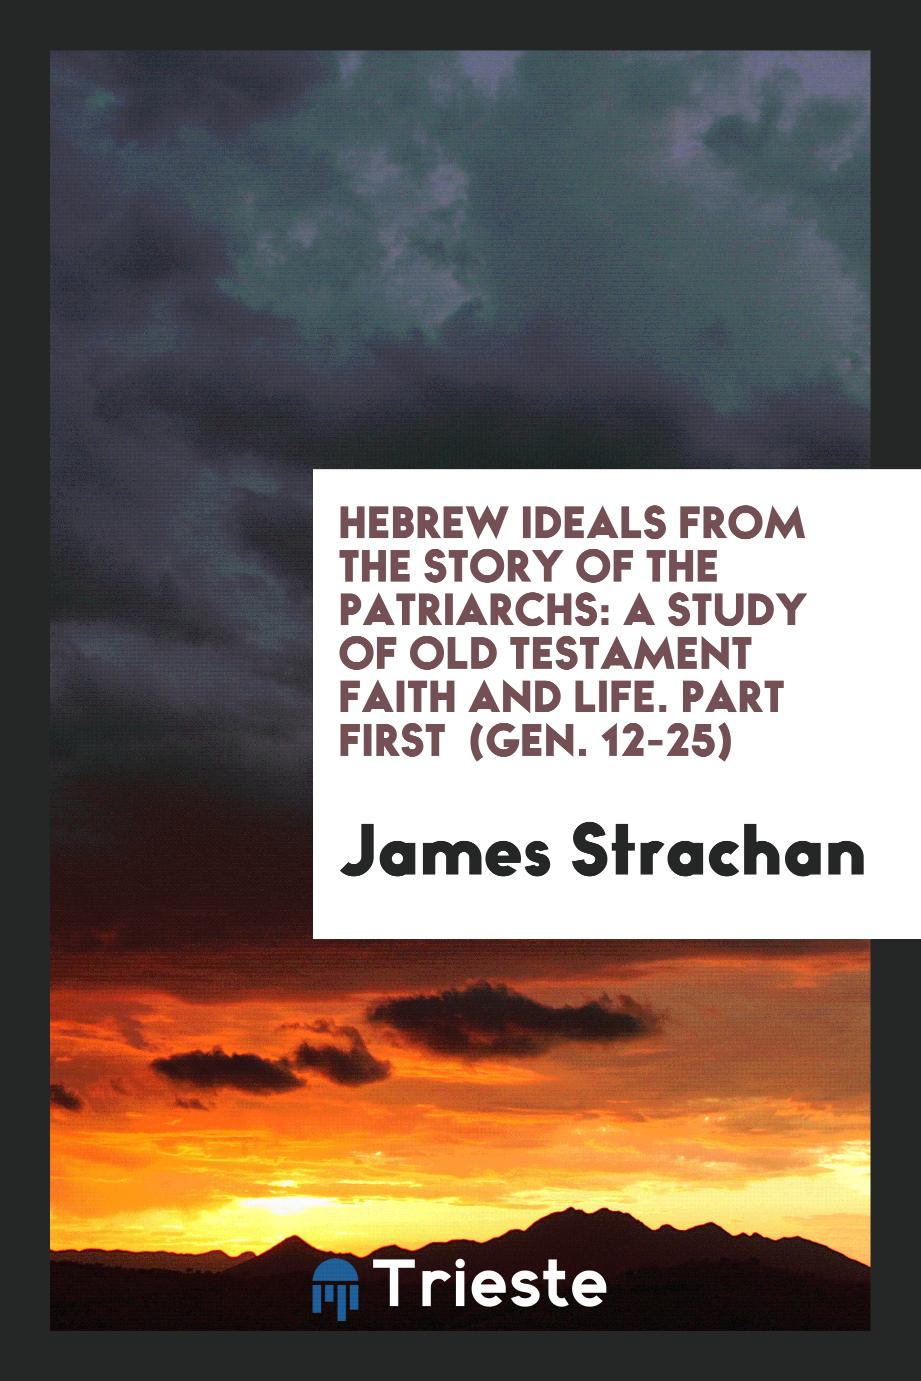 Hebrew Ideals from the Story of the Patriarchs: A Study of Old Testament Faith and Life. Part First (Gen. 12-25)